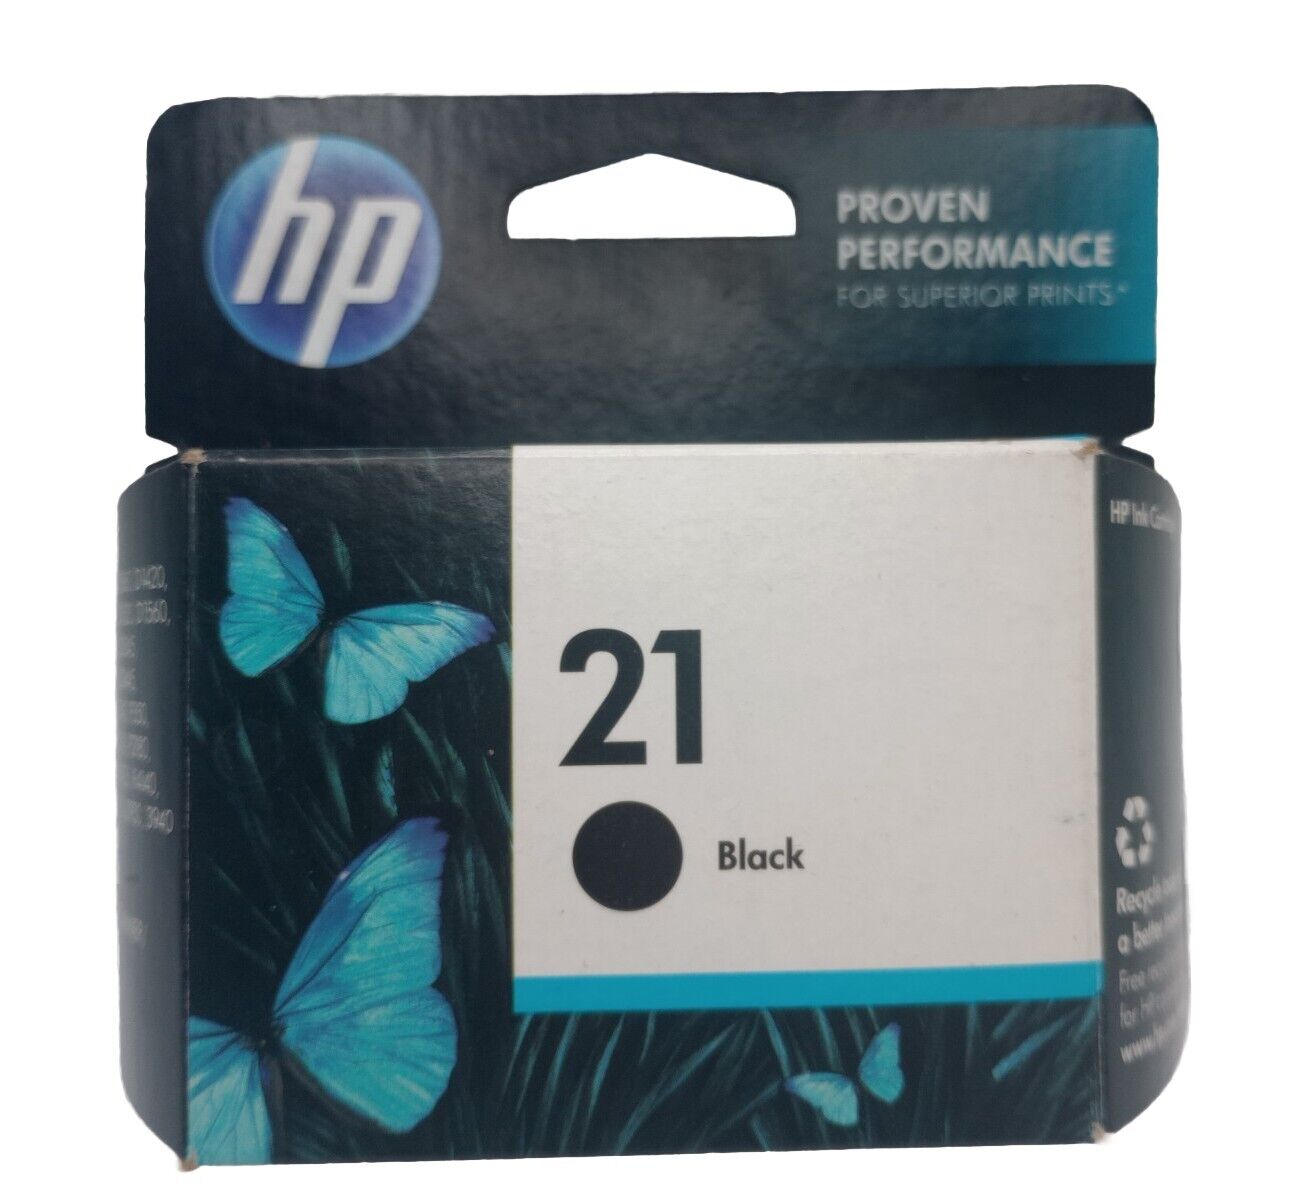 HP 21 Black Original Genuine HP Ink New Expired May 2014 Made In Malaysia